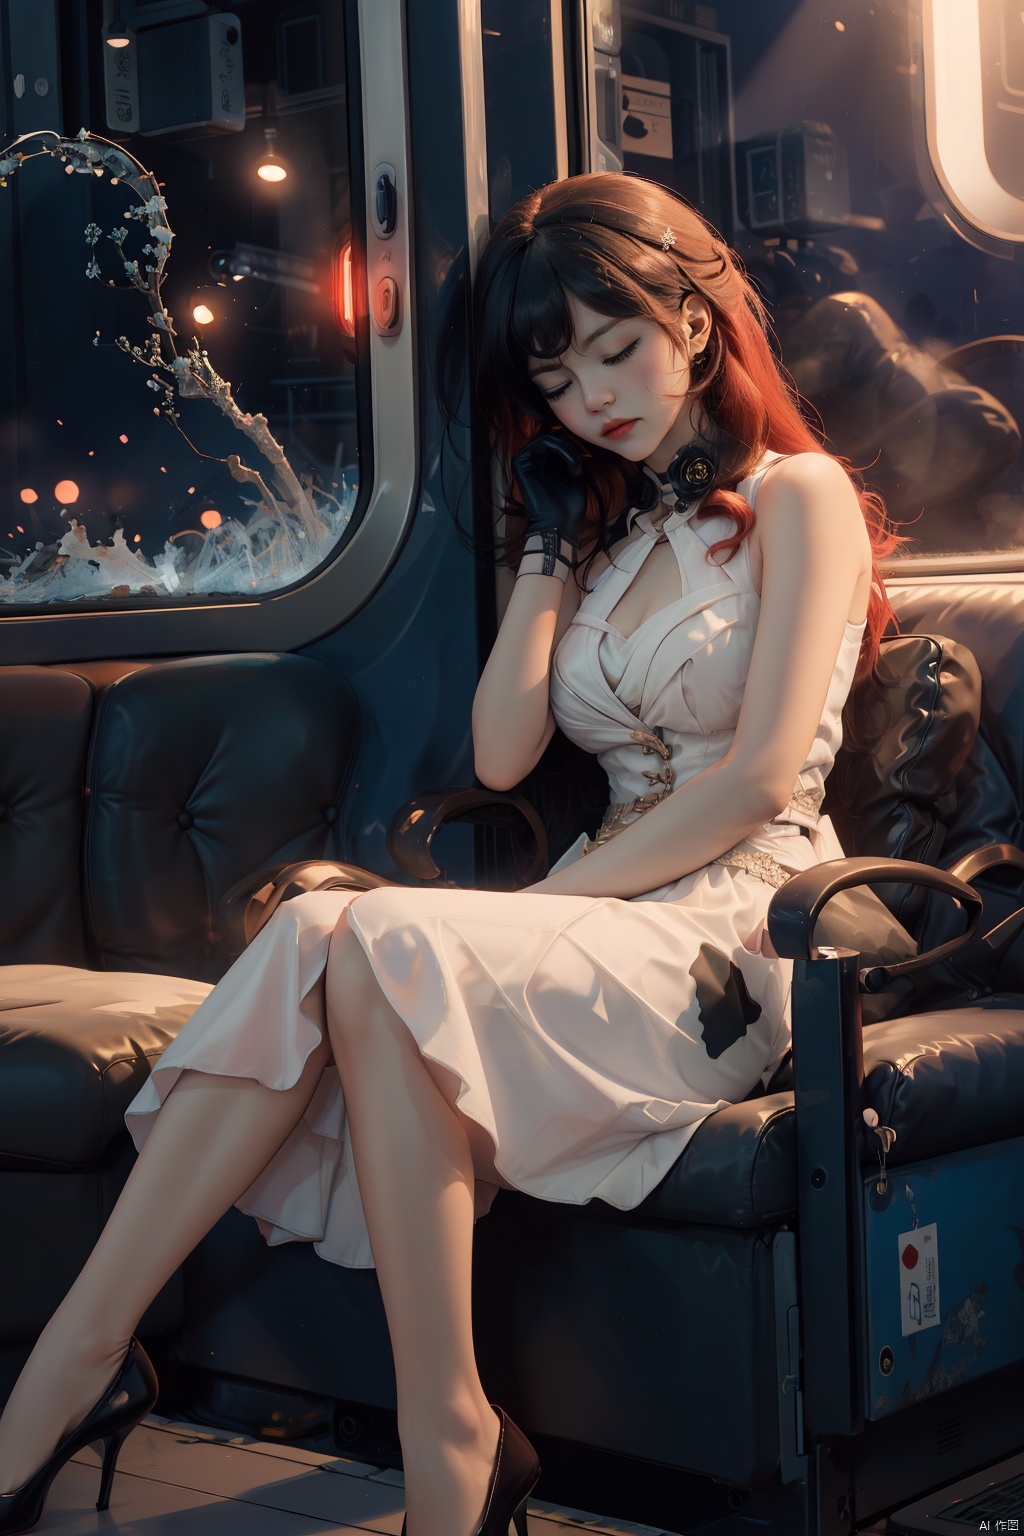 1man leans against the door of a train, her eyes closed as she listens to music through she headphones,The train is passing through a city at night, and the city lights flicker in the window behind him,his face is serene, a contrast to the bustling world outside,The scene captures a moment of personal tranquility amidst the urban chaos,
\\\\\\\\\\\\\\
jizi,def clothes,Black coat,1girl,dress,red hair,white dress,single glove,yellow eyes,long hair,bangs,blackfootwear,breasts, beautiful face, realism